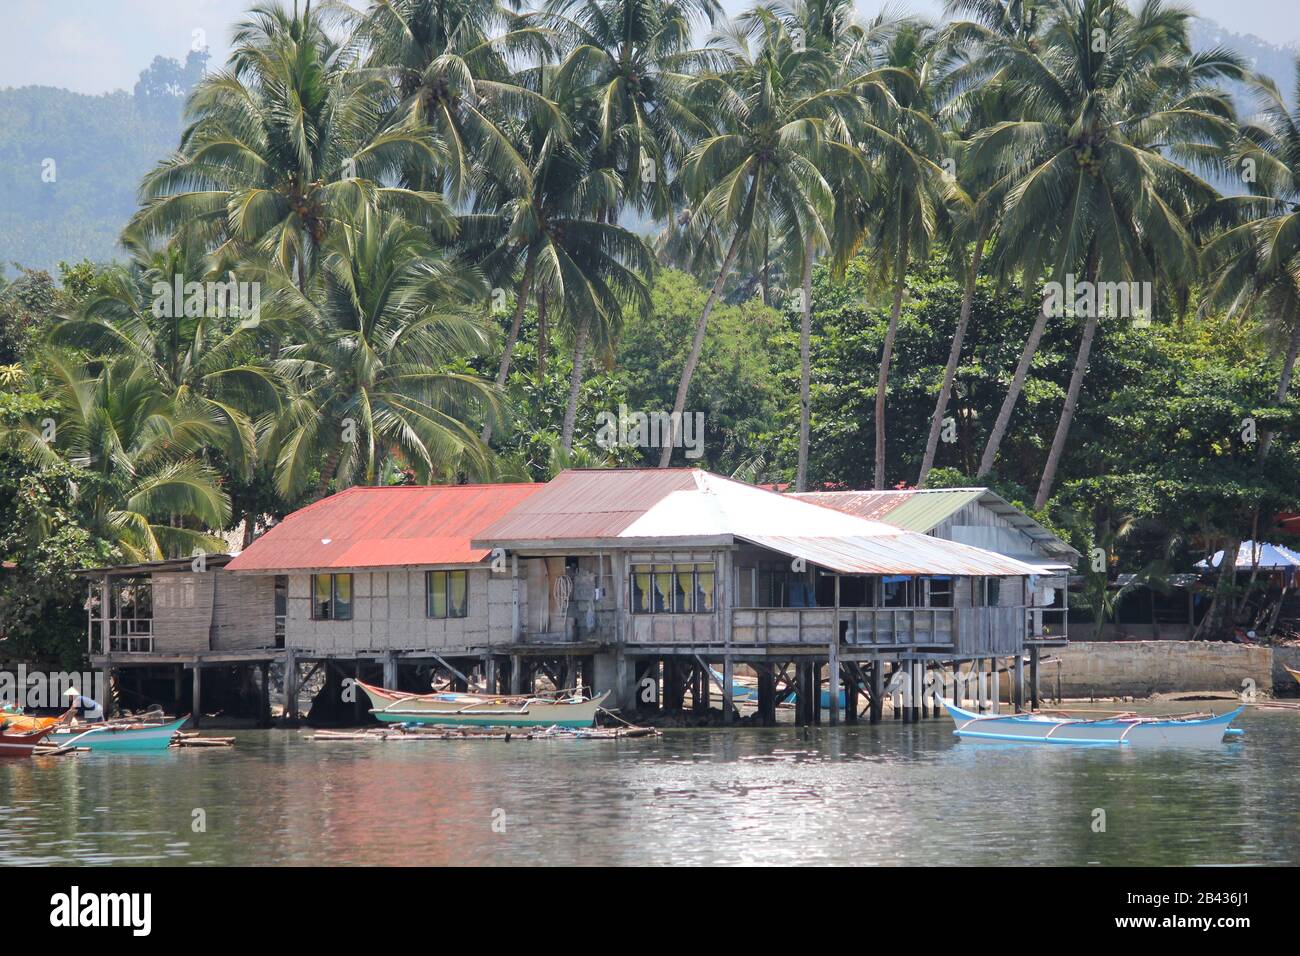 Outrigger boats and houses on stilts in a fishing village in Surigao del Sur, Philippines. Stock Photo